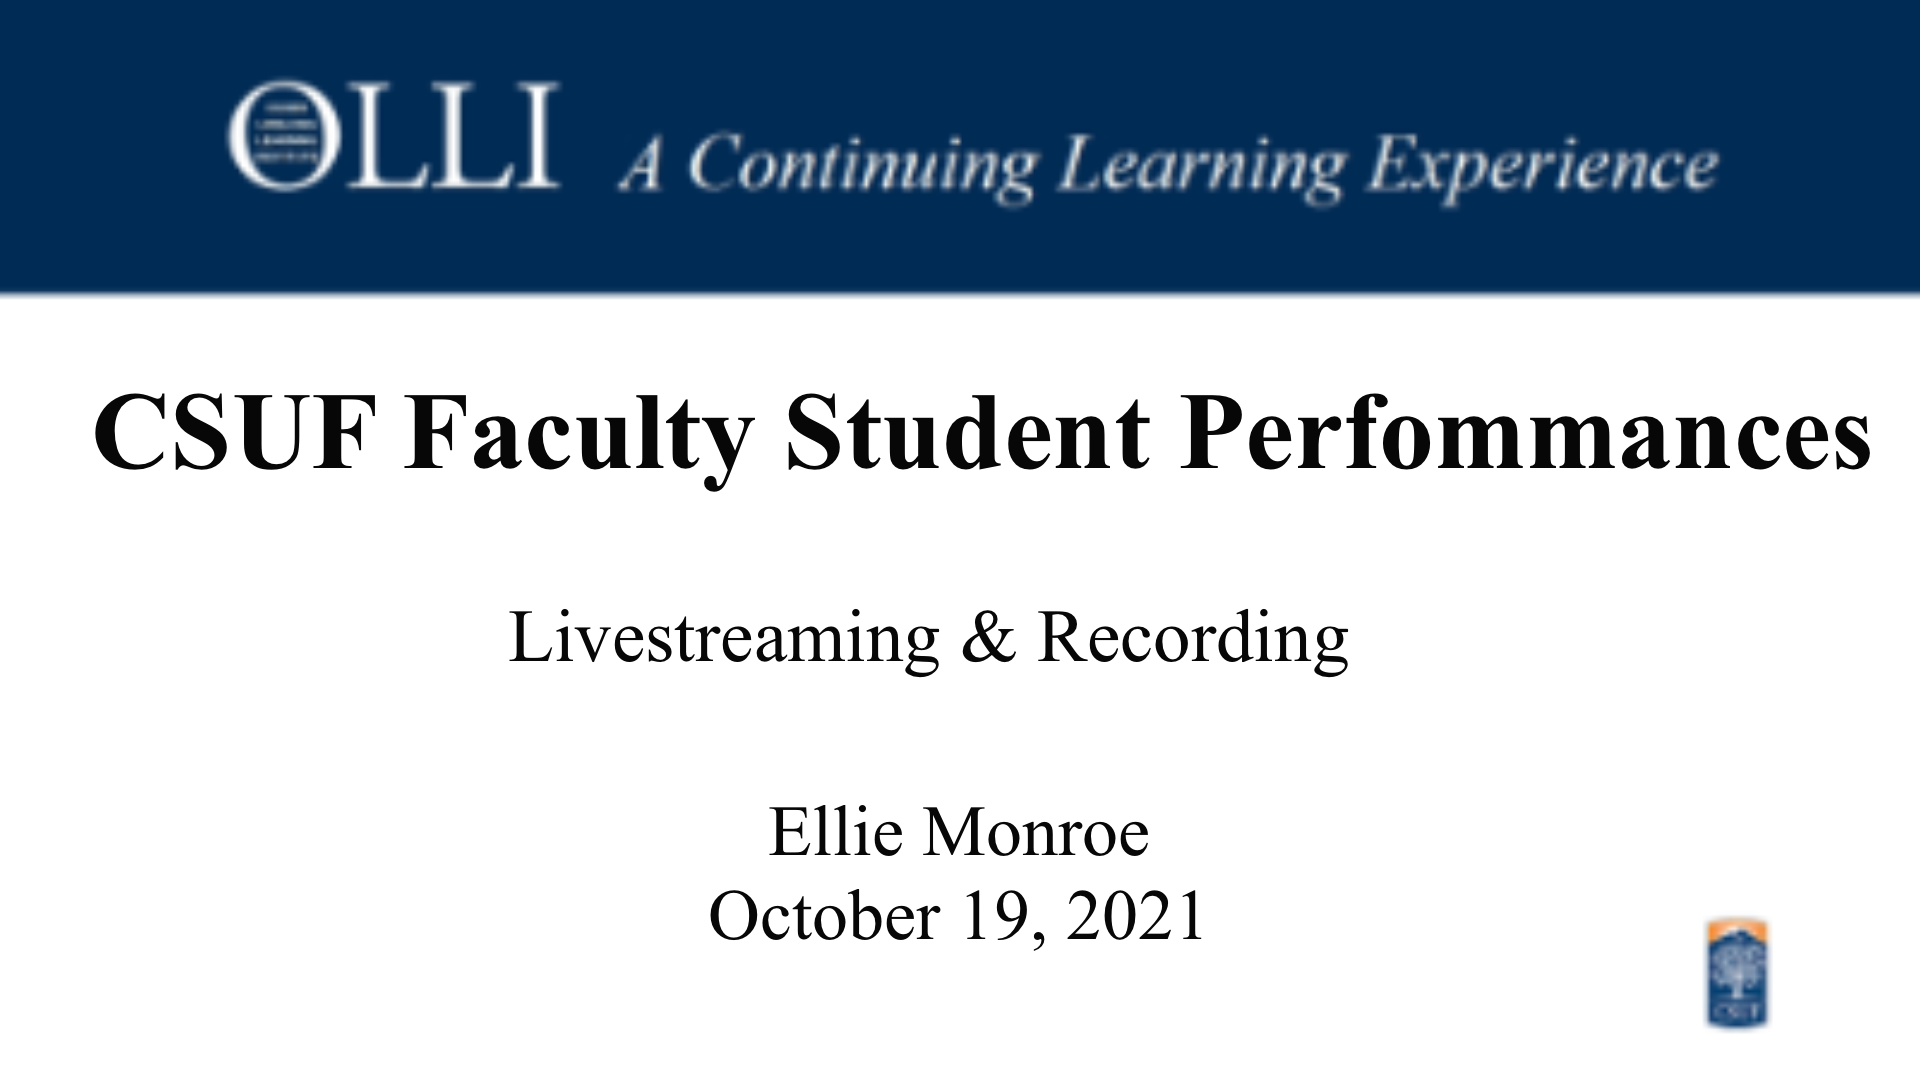 Click here to view the livestream of the Faculty Student performance